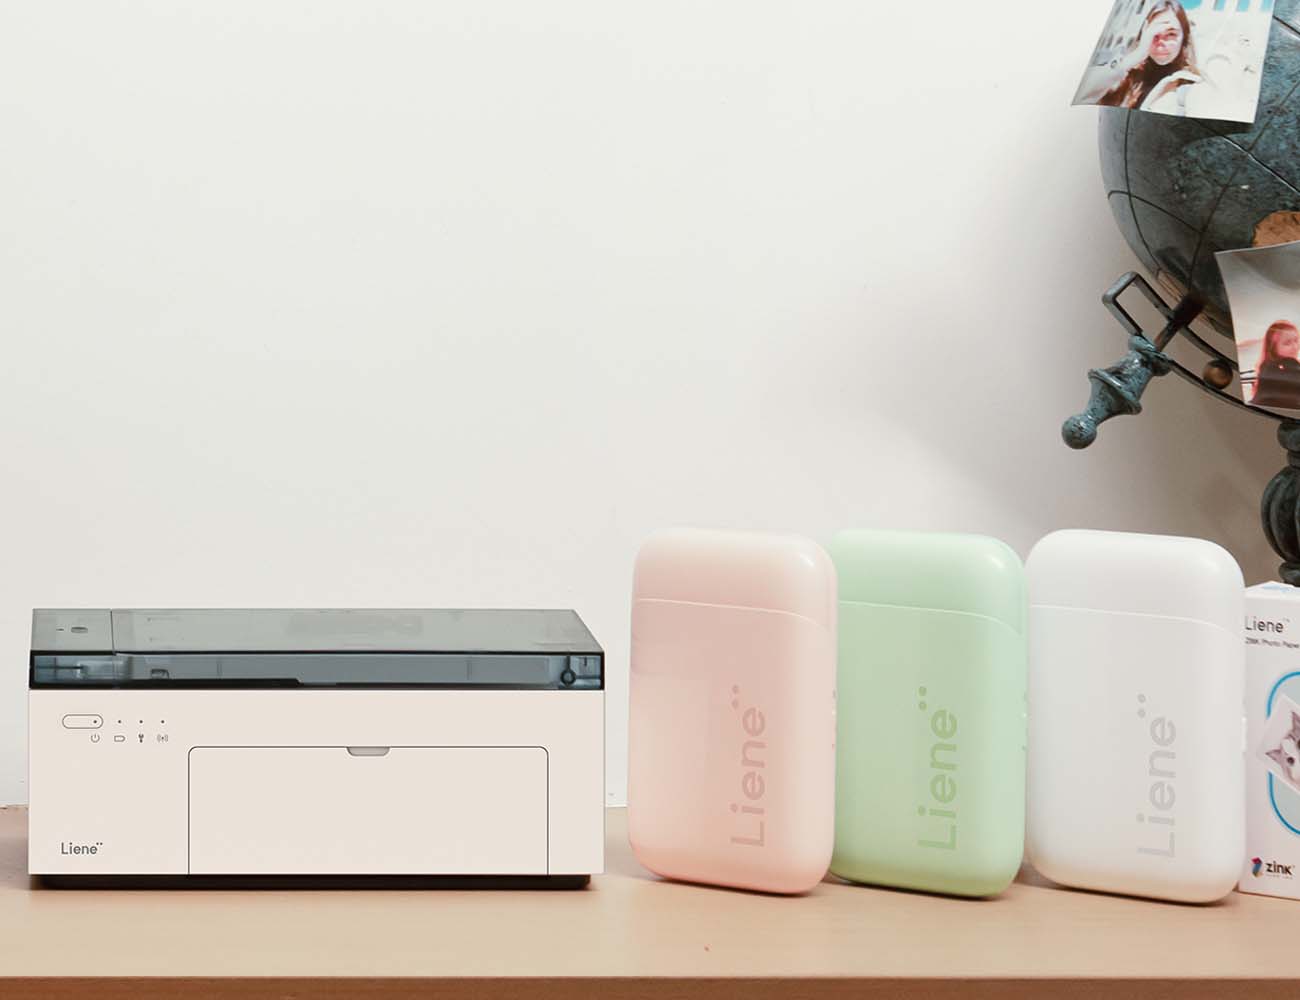 Liene’s Amber and Pearl series of photo printers are displayed on a table